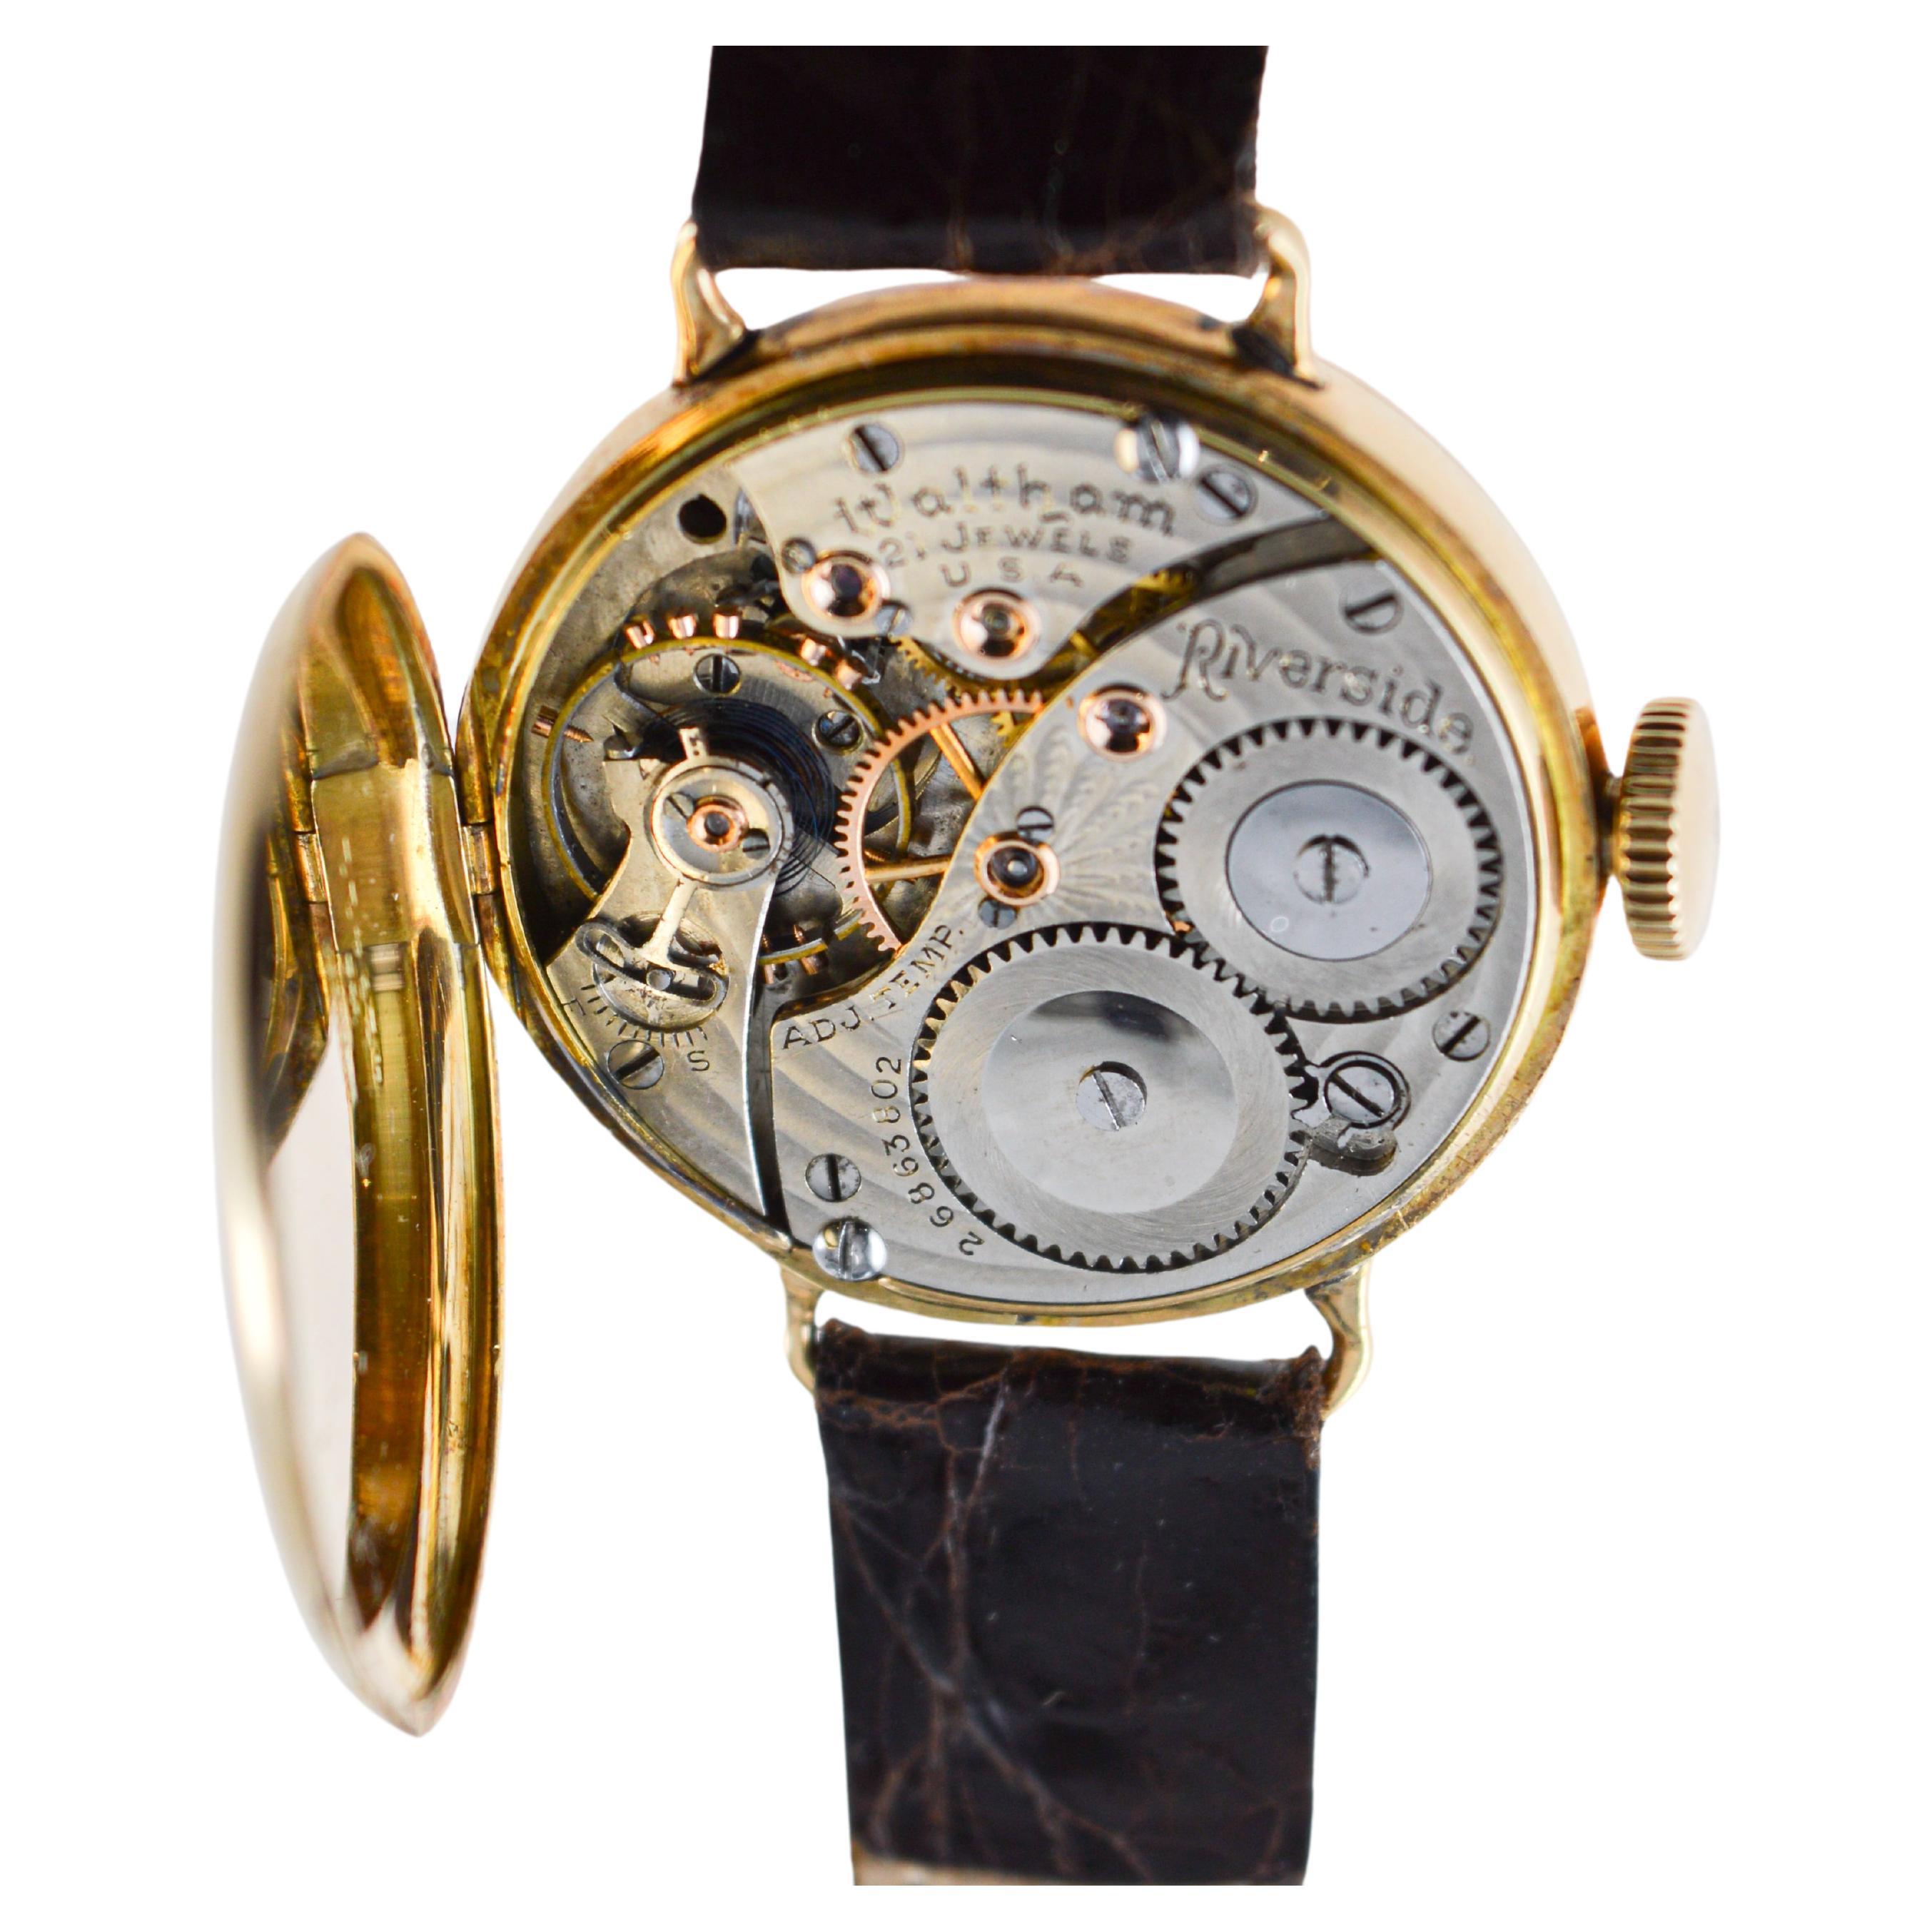 Waltham 14Kt. Gold Campaign Style Watch from 1915 with Original Enamel Dial 1929 For Sale 8